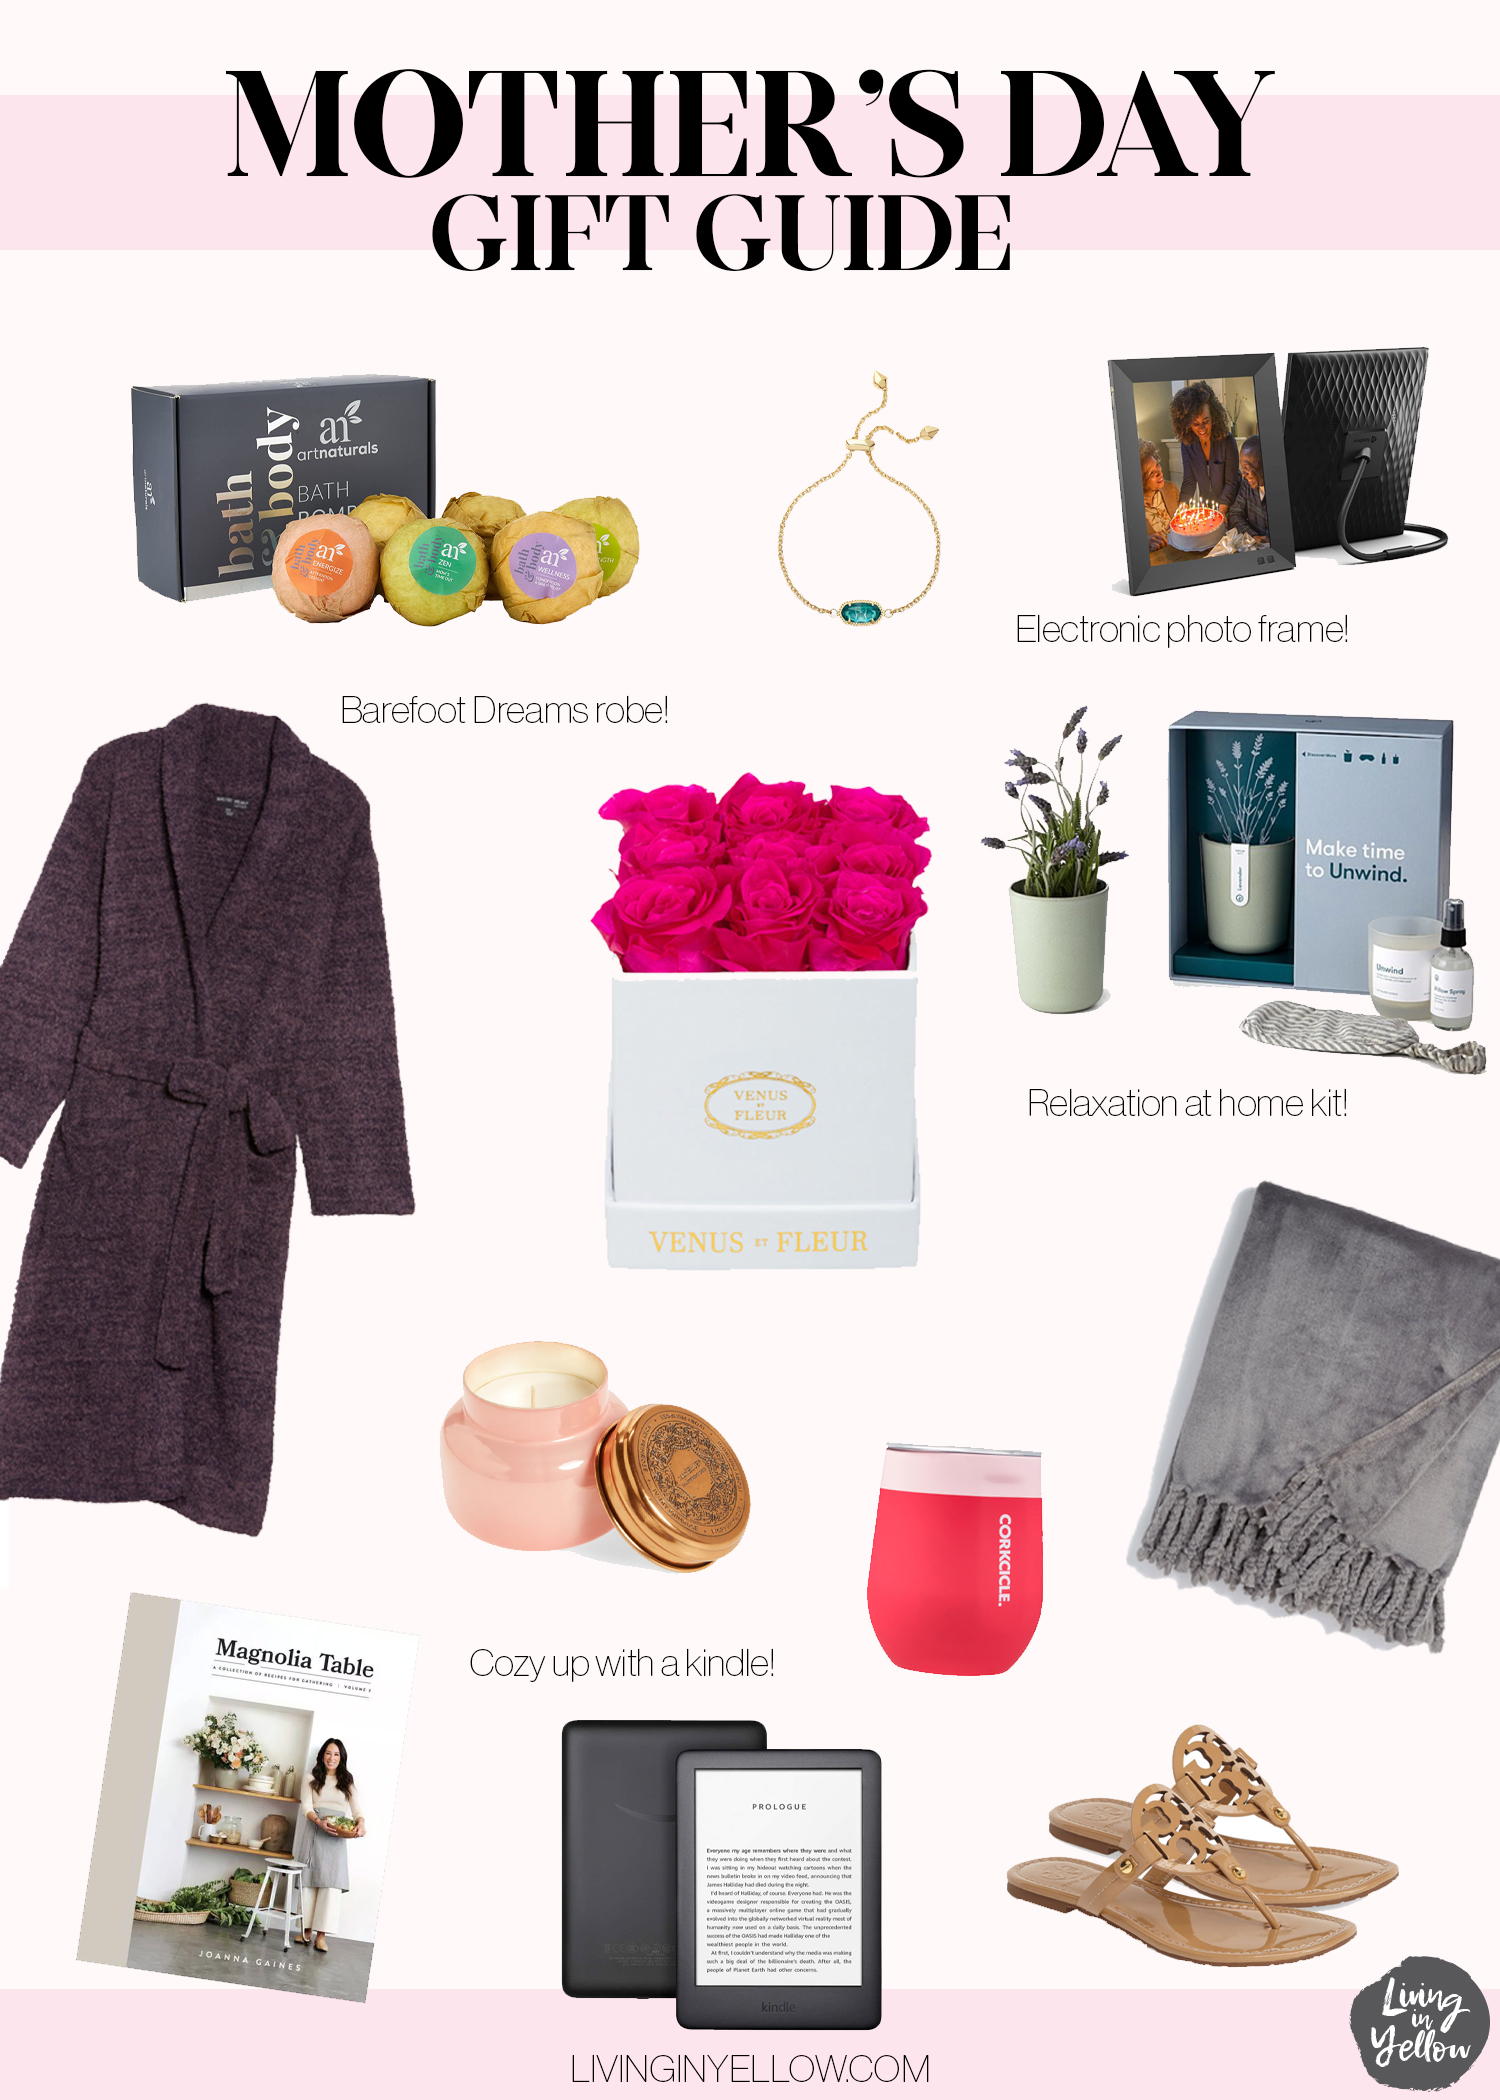 Special Segment! Mother's Day Gift Guide 2021 & Gifts that can be